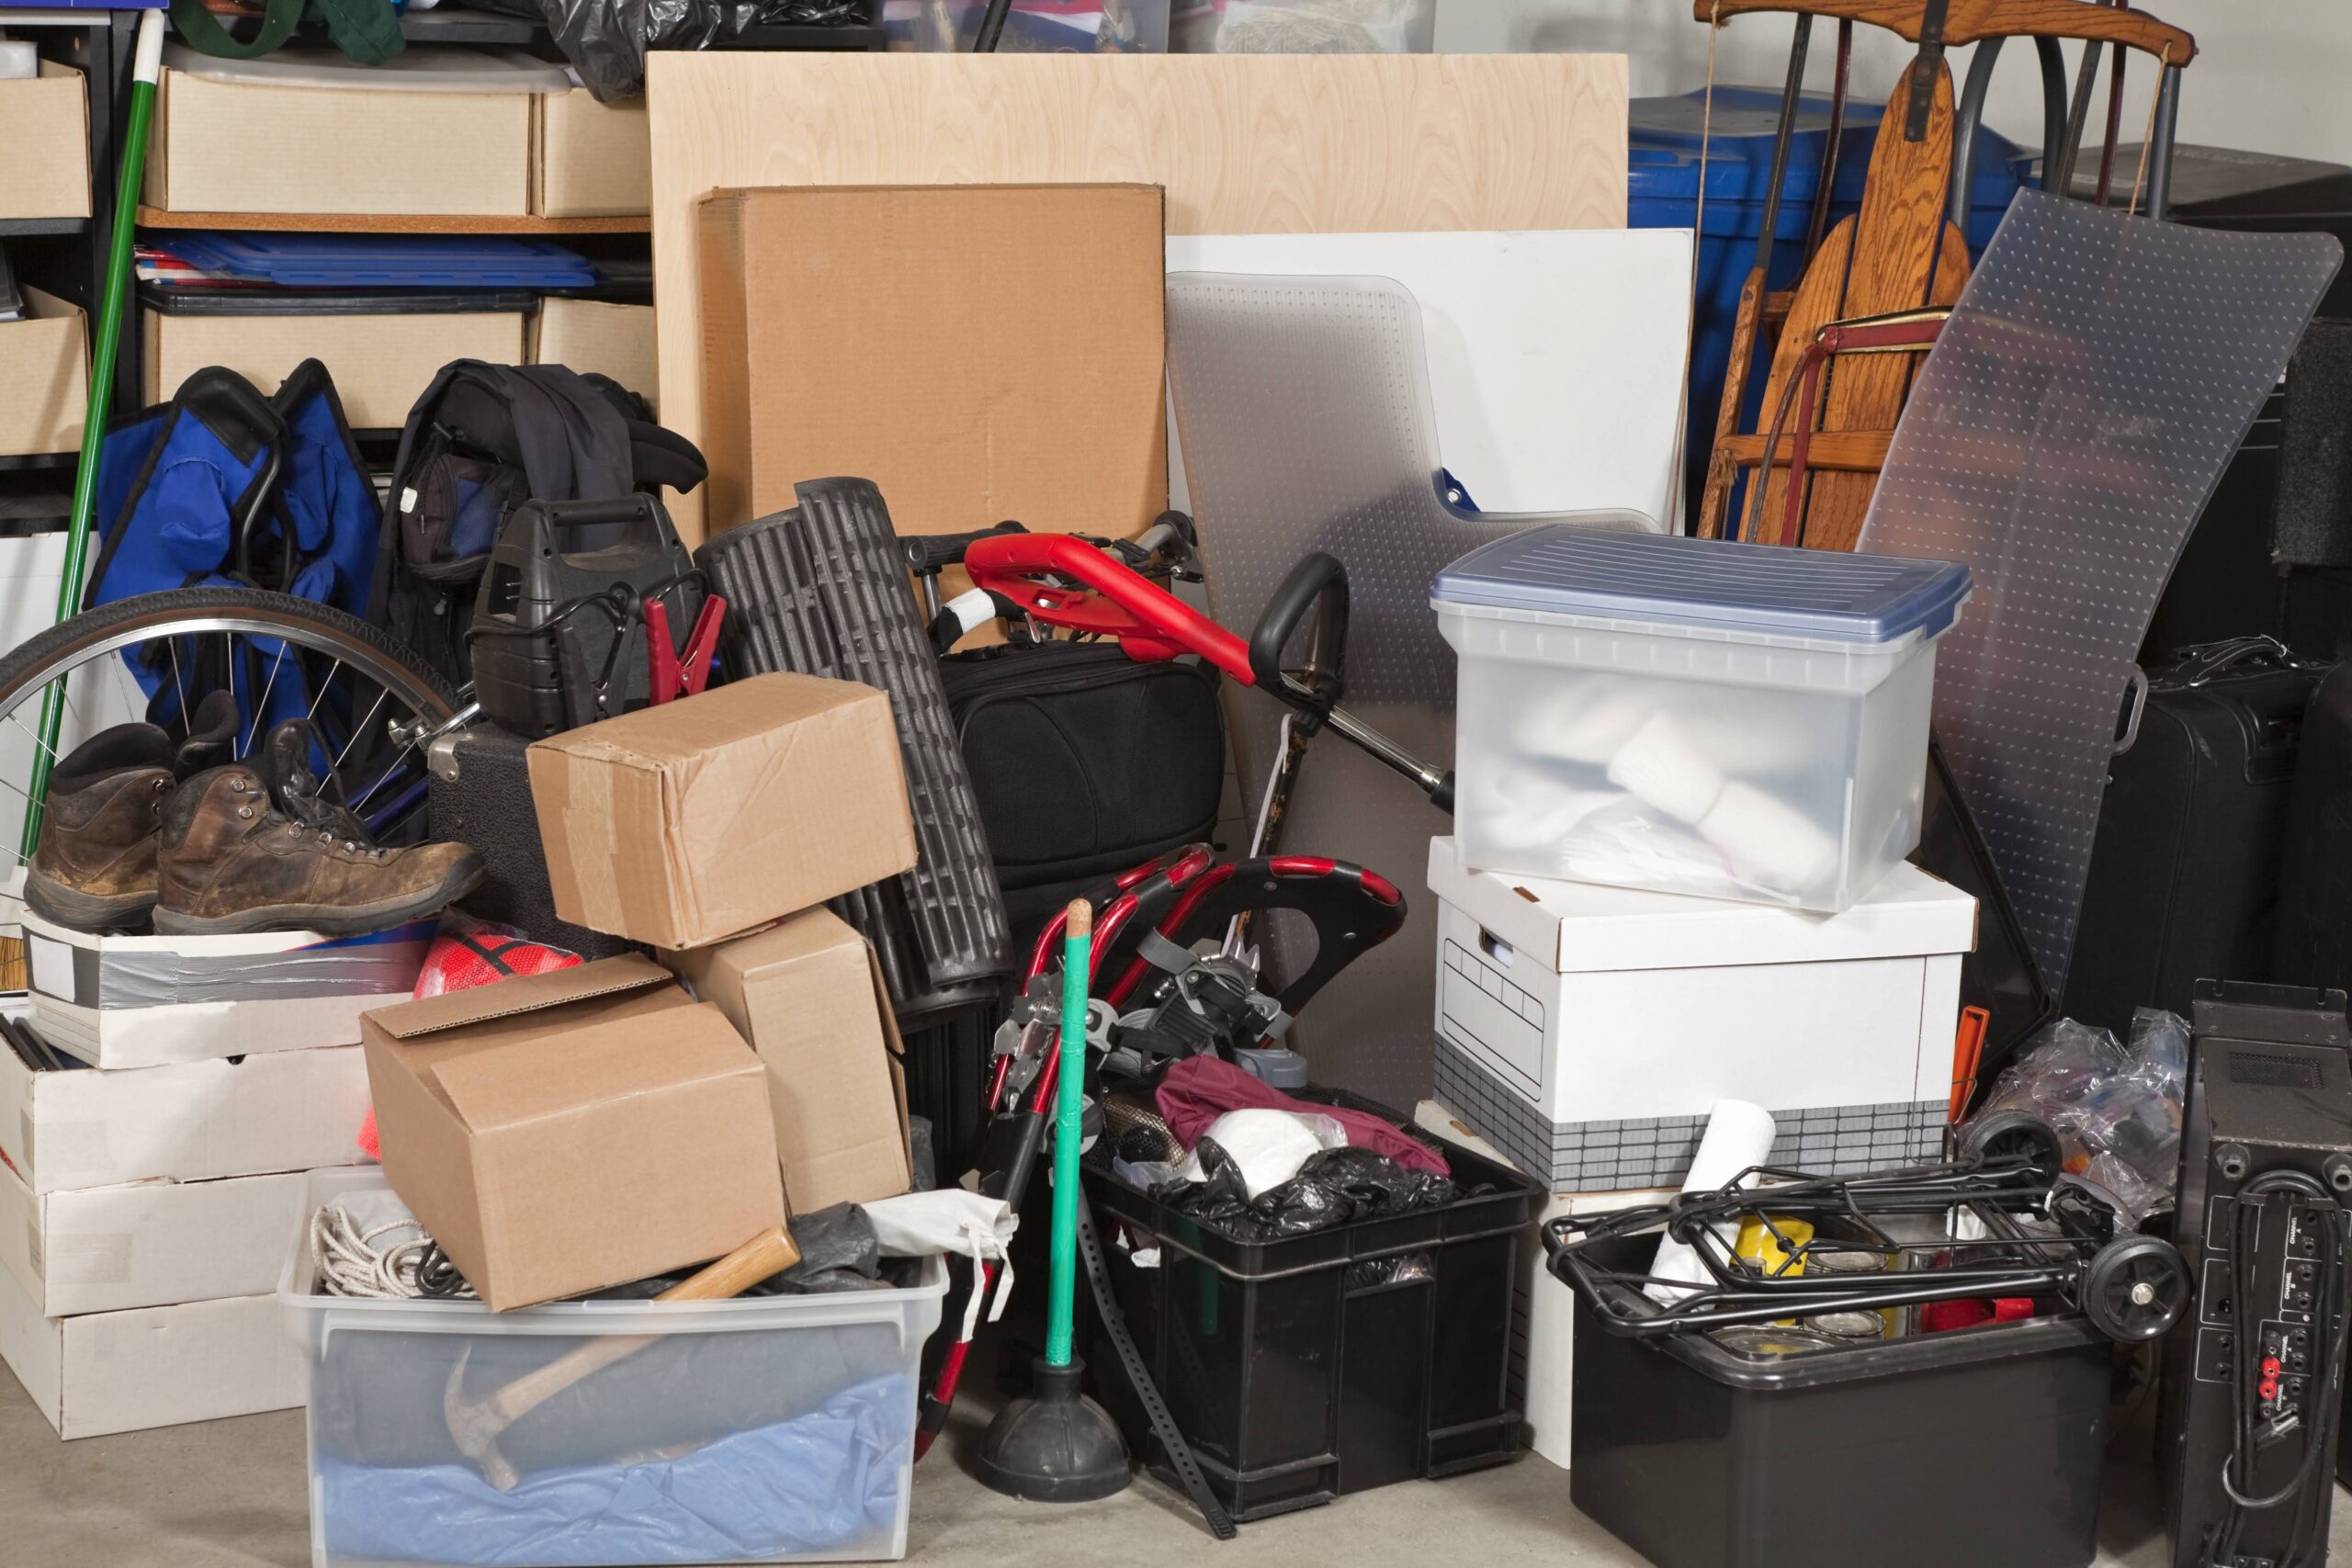 6 Reasons Why You Should Store Items When Downsizing